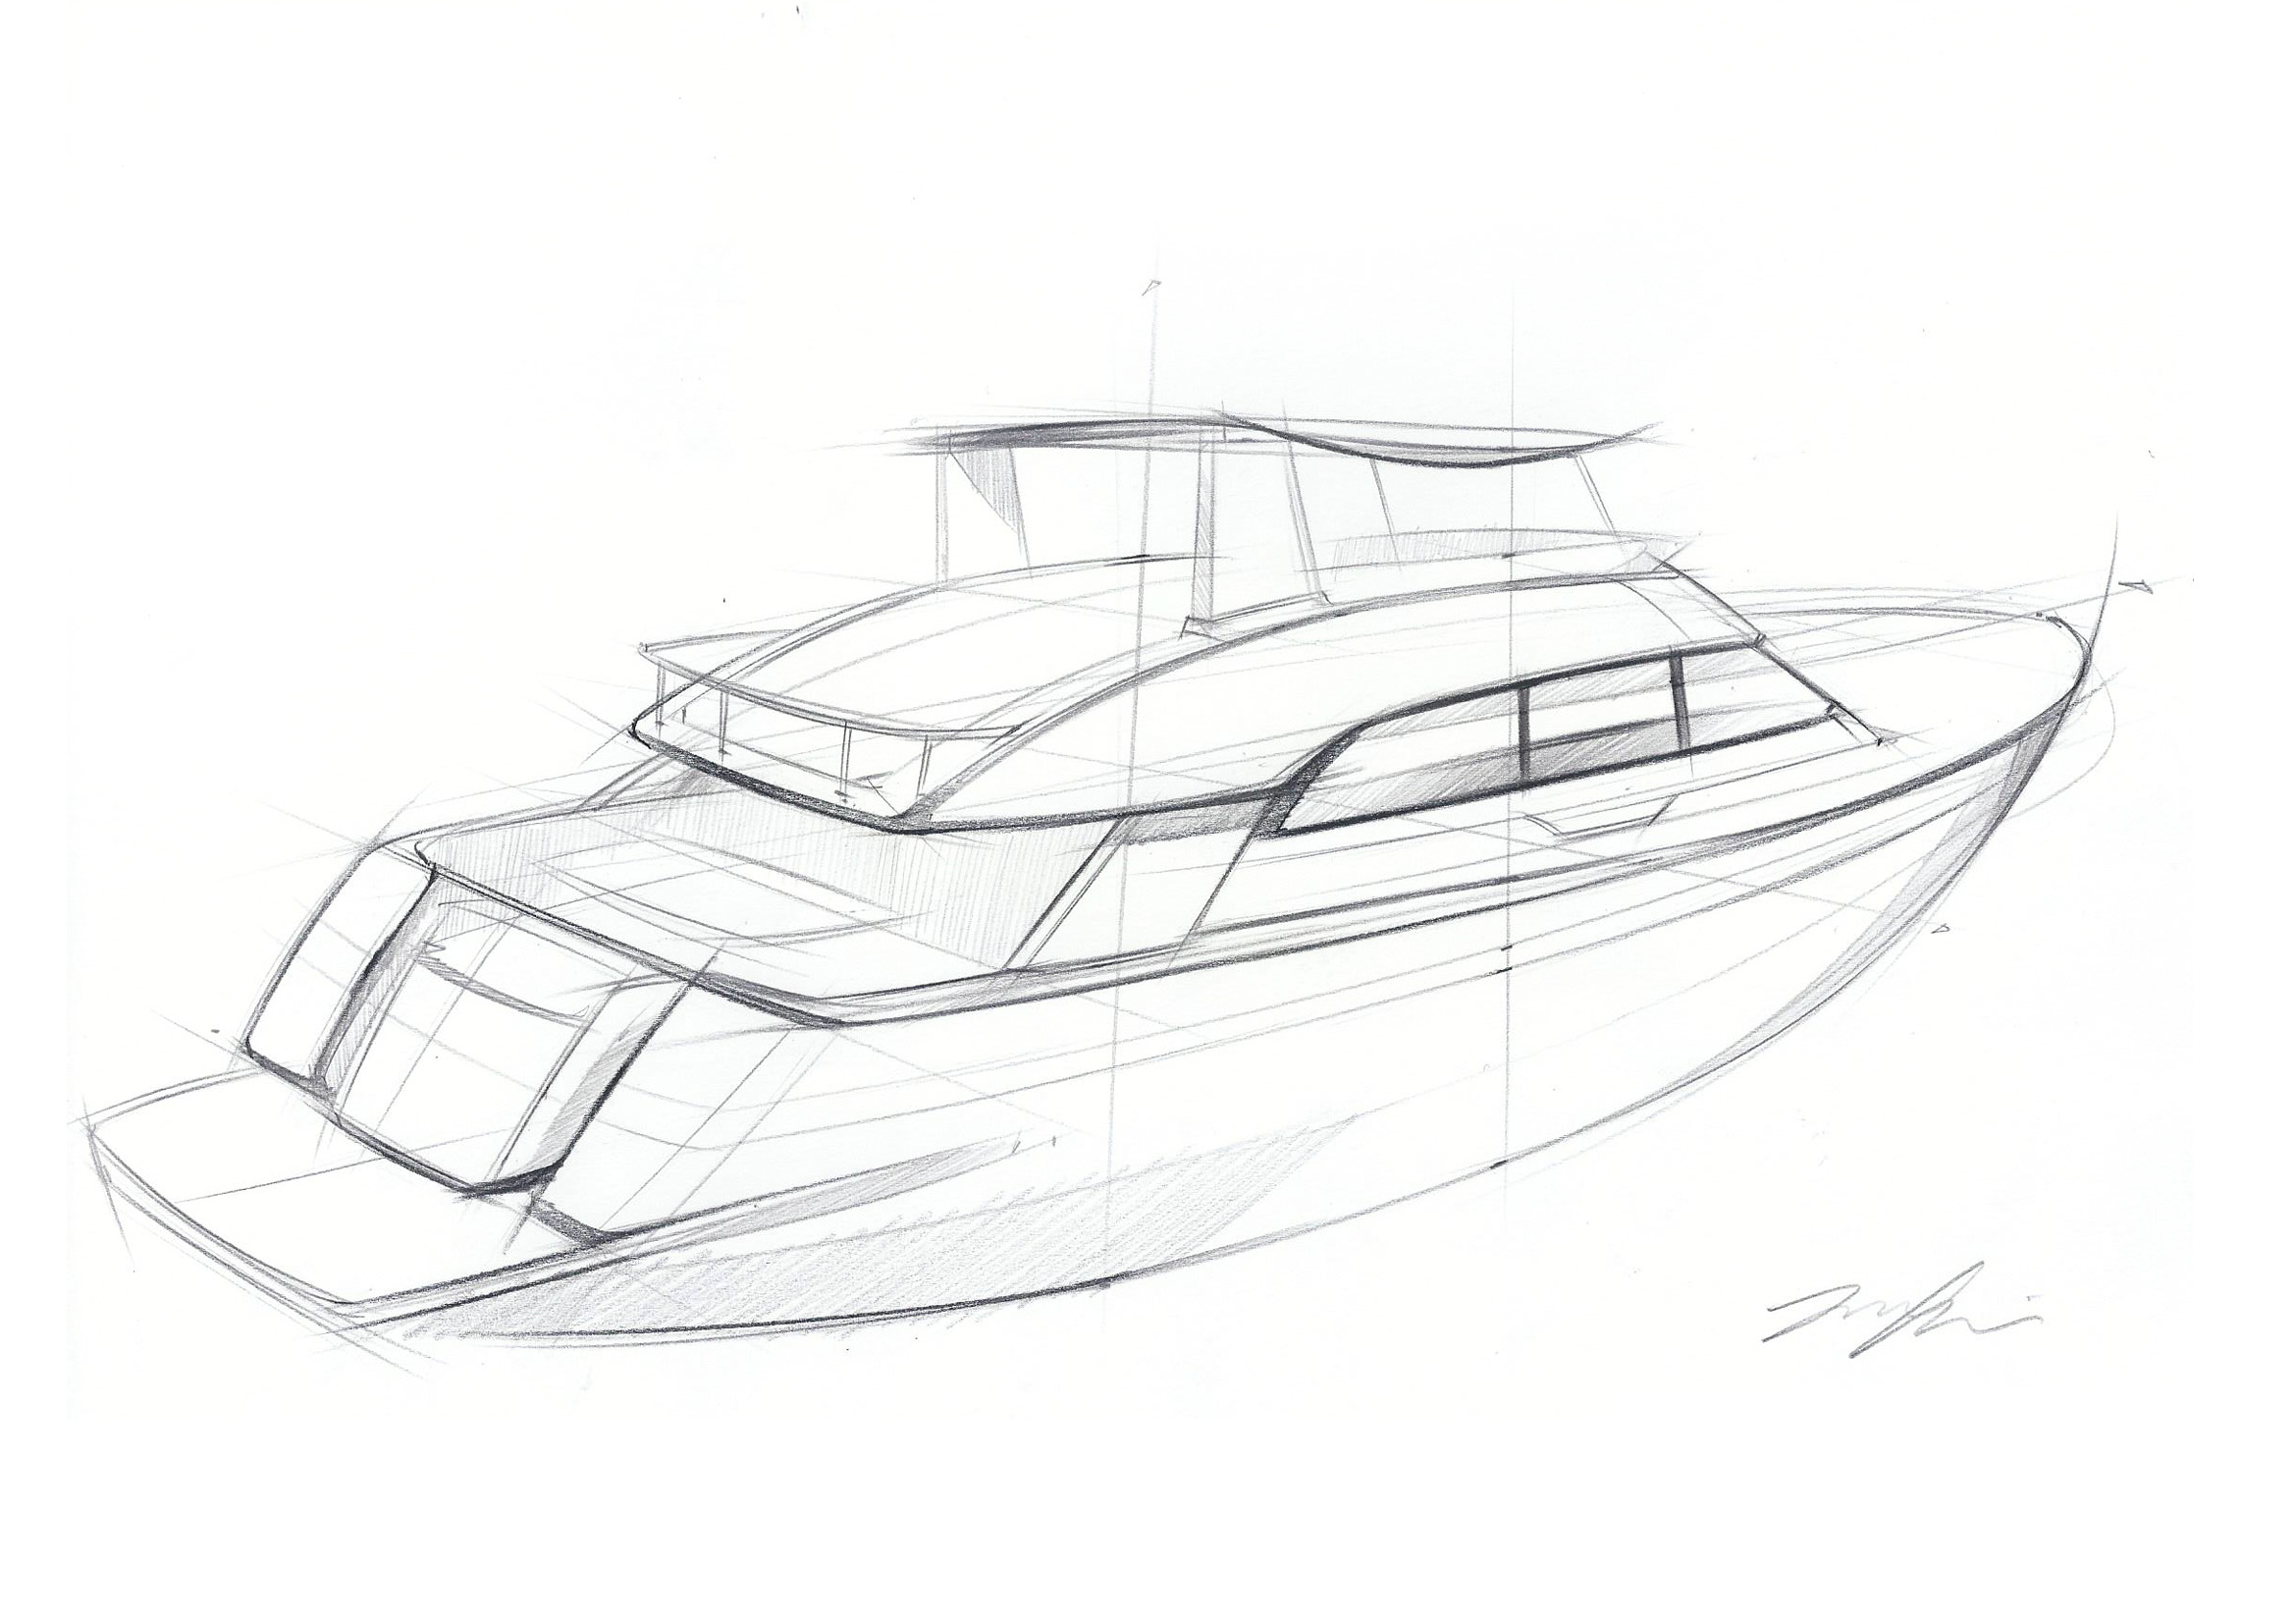 Yacht Drawing